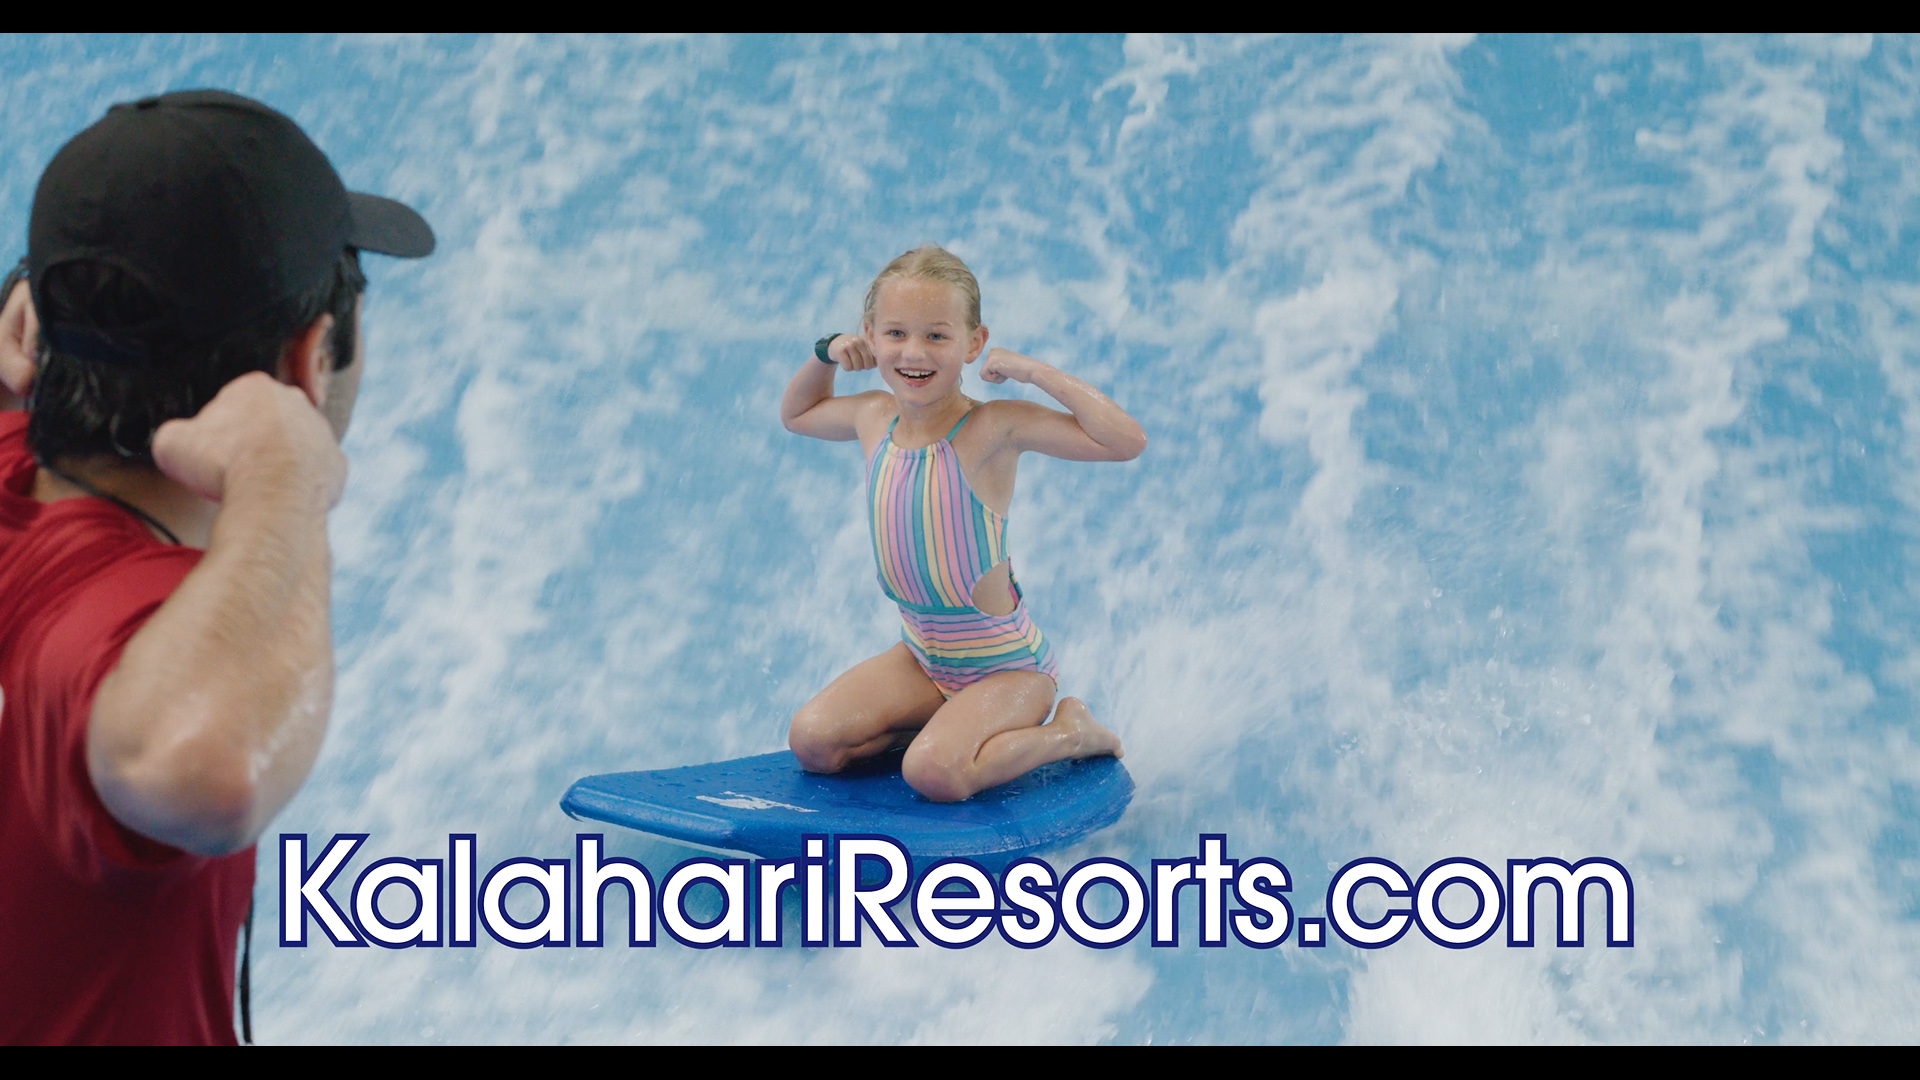 Reality stars, the Busby Family, showcase the fun they had at Kalahari Resorts in Round Rock, Texas in celebration of the upcoming holiday, National Waterpark Day.